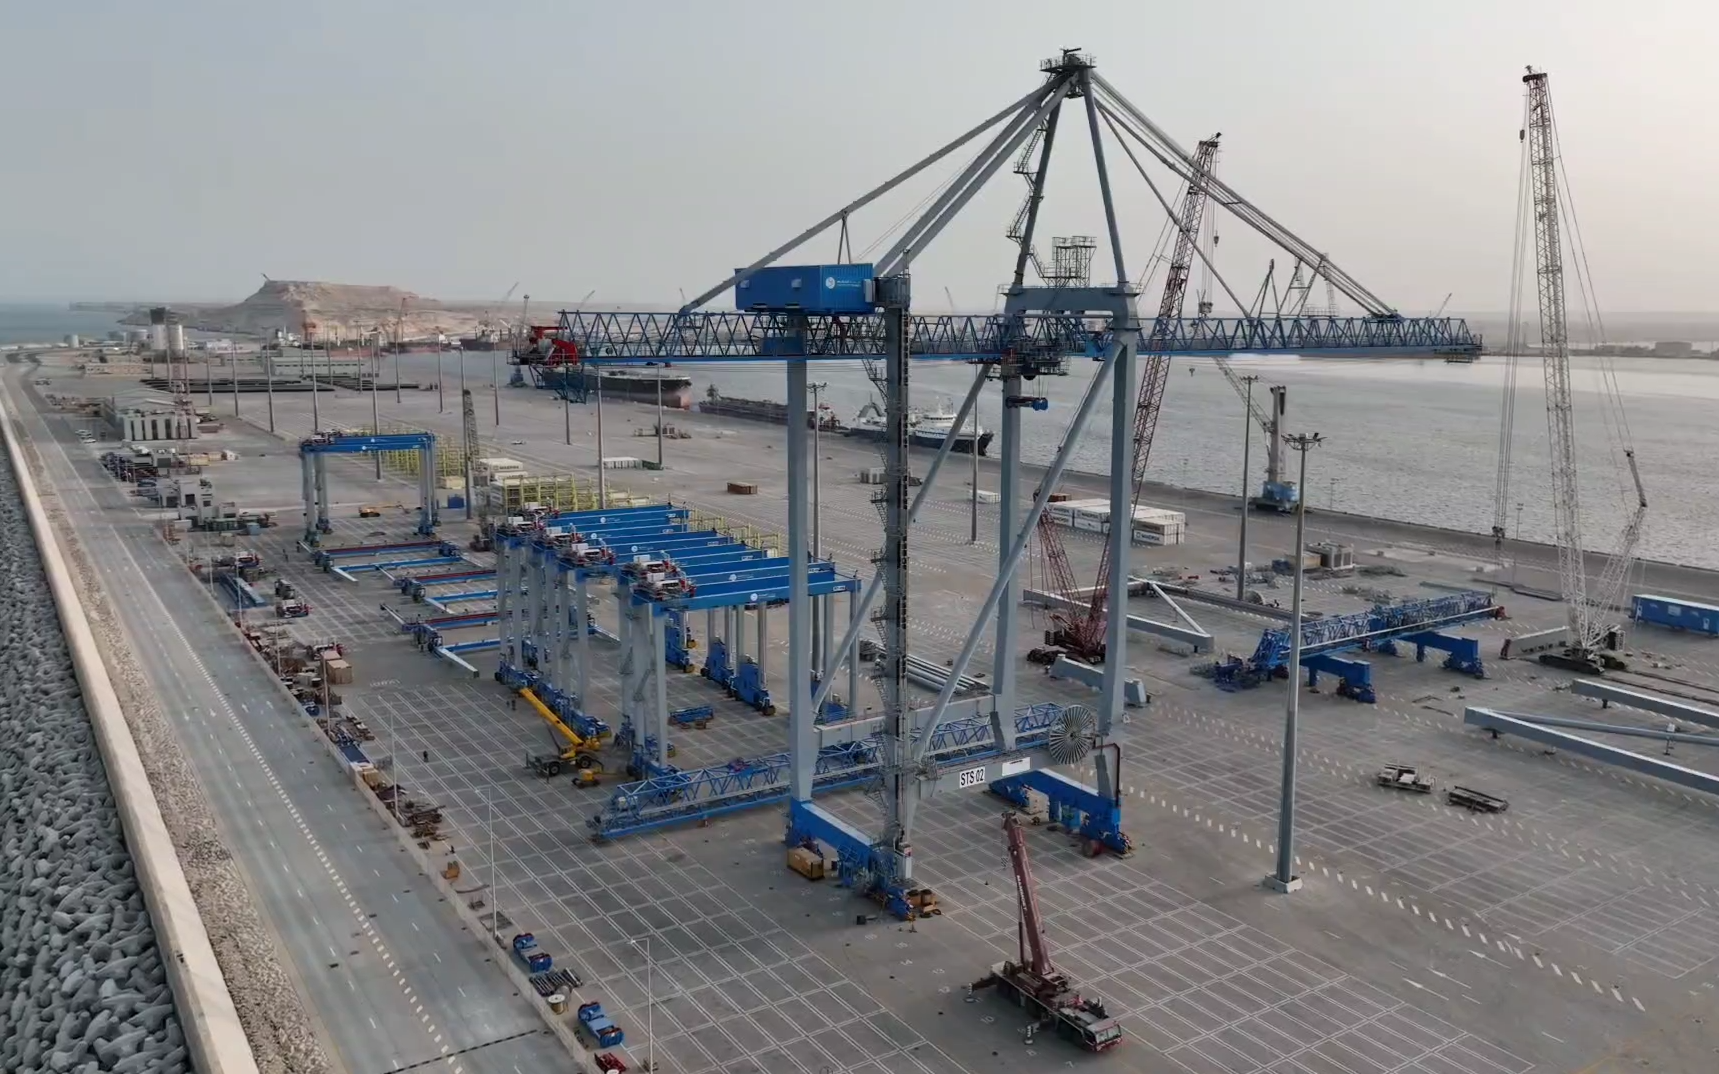 6 billion Omani riyals the volume of investments in the Special Economic Zone at Duqm